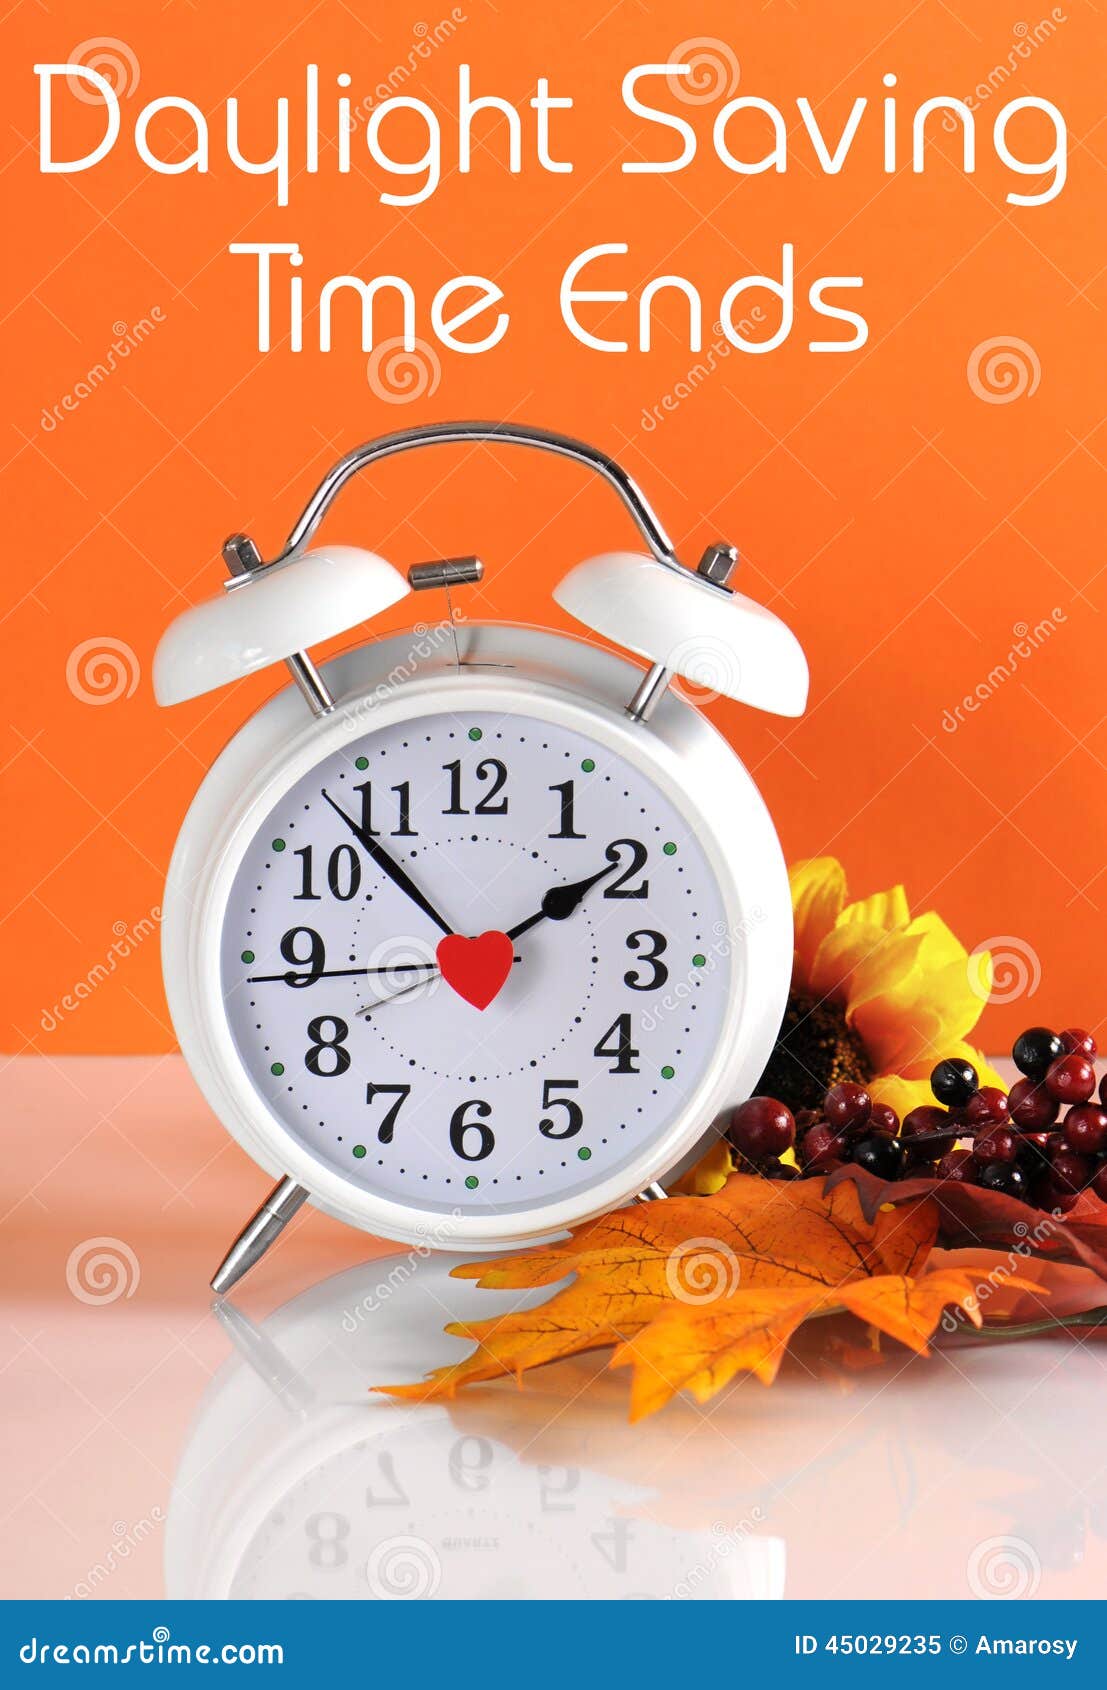 daylight savings time ends in autumn fall with clock concept and text message